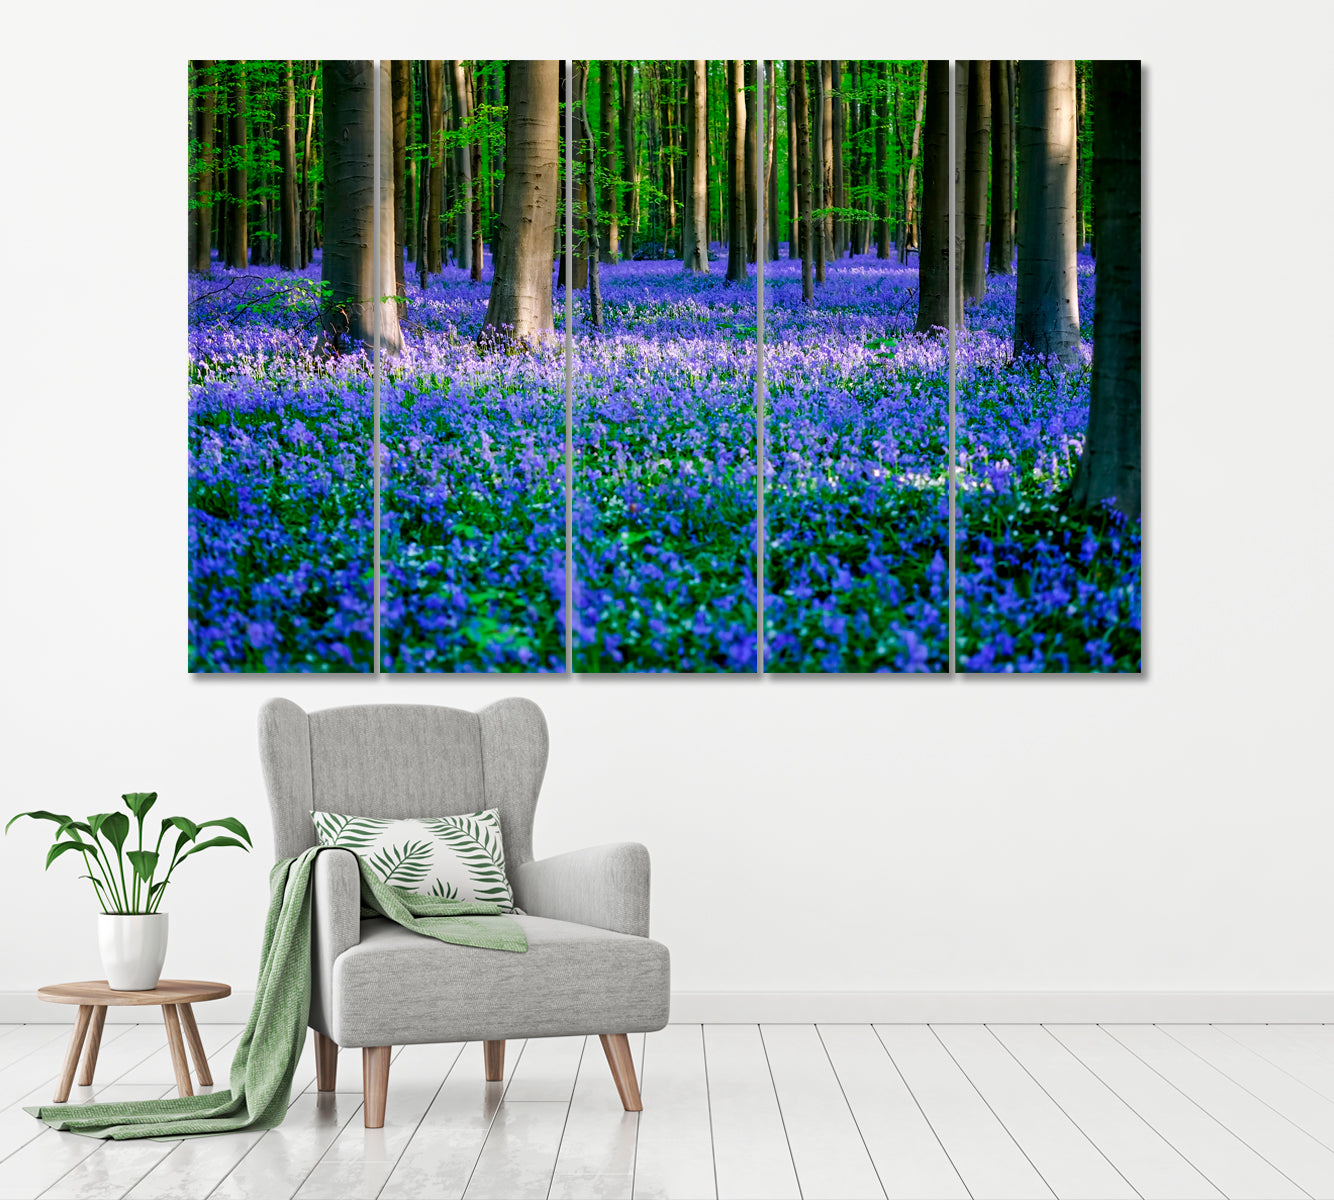 Bluebells in Forest Hallerbos Belgium Canvas Print ArtLexy 5 Panels 36"x24" inches 